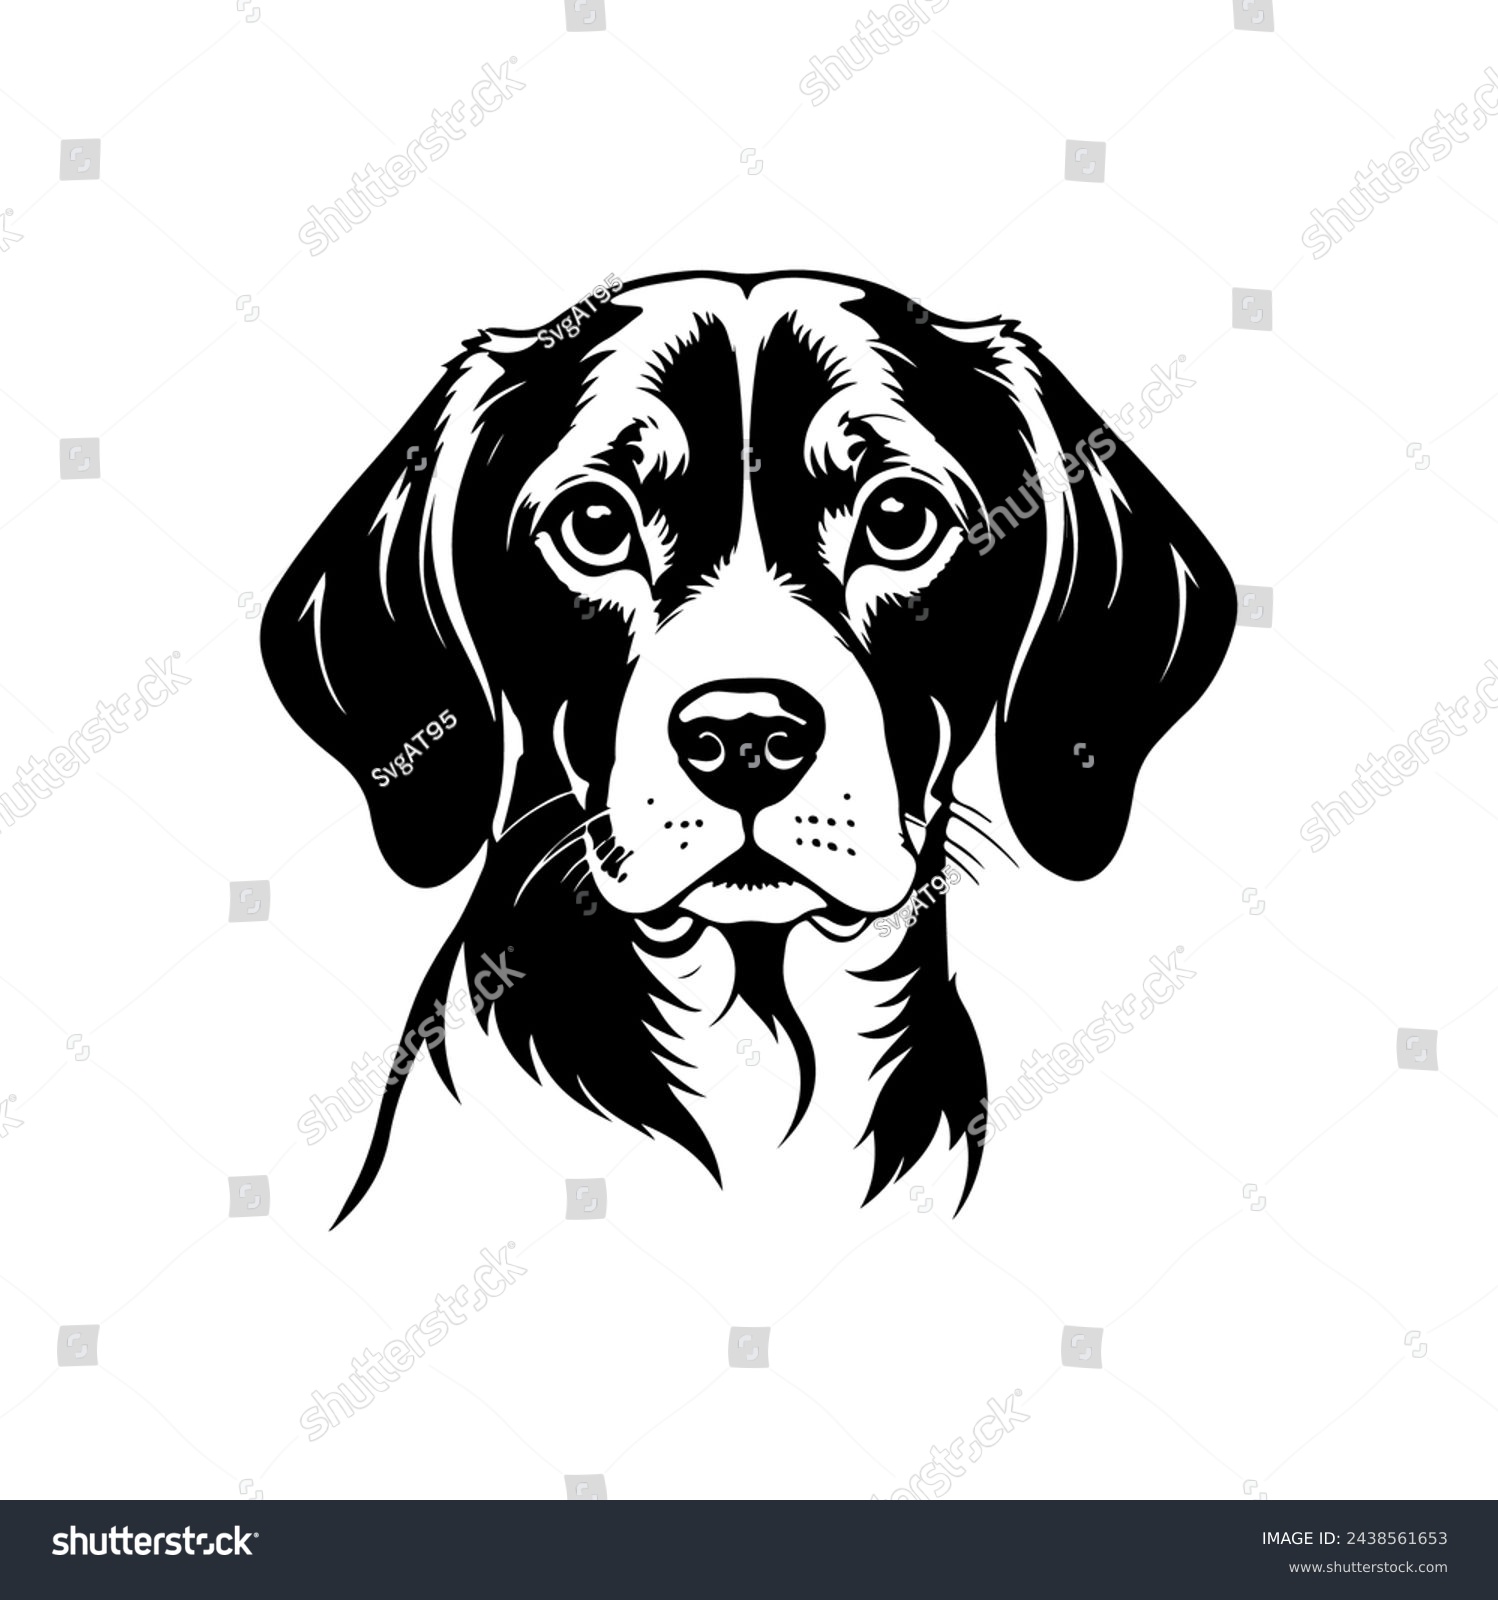 SVG of Portrait of a Beagle Dog Vector isolated on white background, Dog Silhouettes. svg